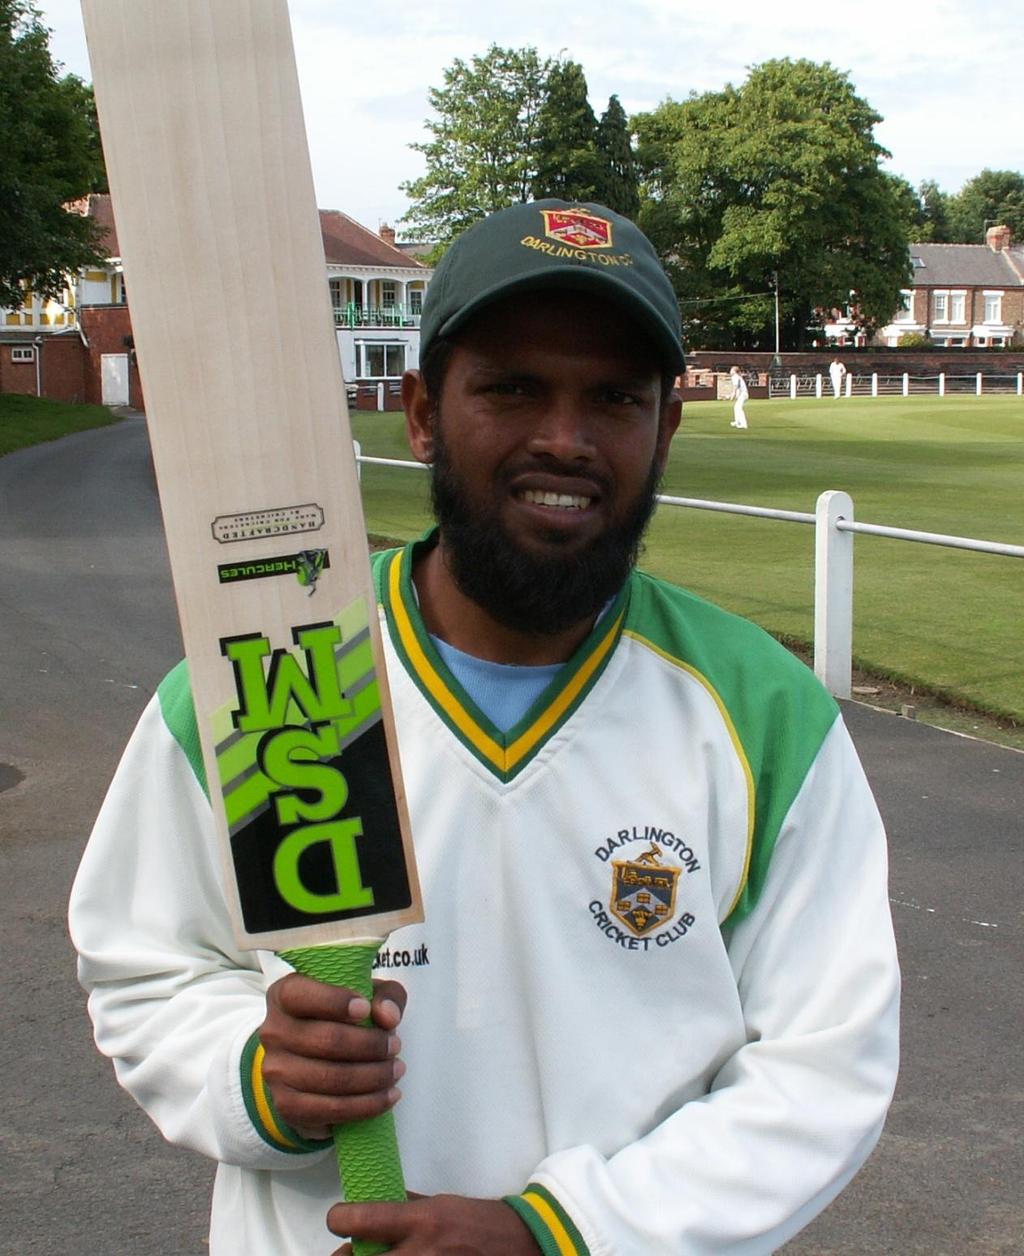 The 2011 Overseas professional Rajin Saleh became the first ever Bangladeshi International cricketer to not only play for Darlington but also to play in the NYSD Premier league.